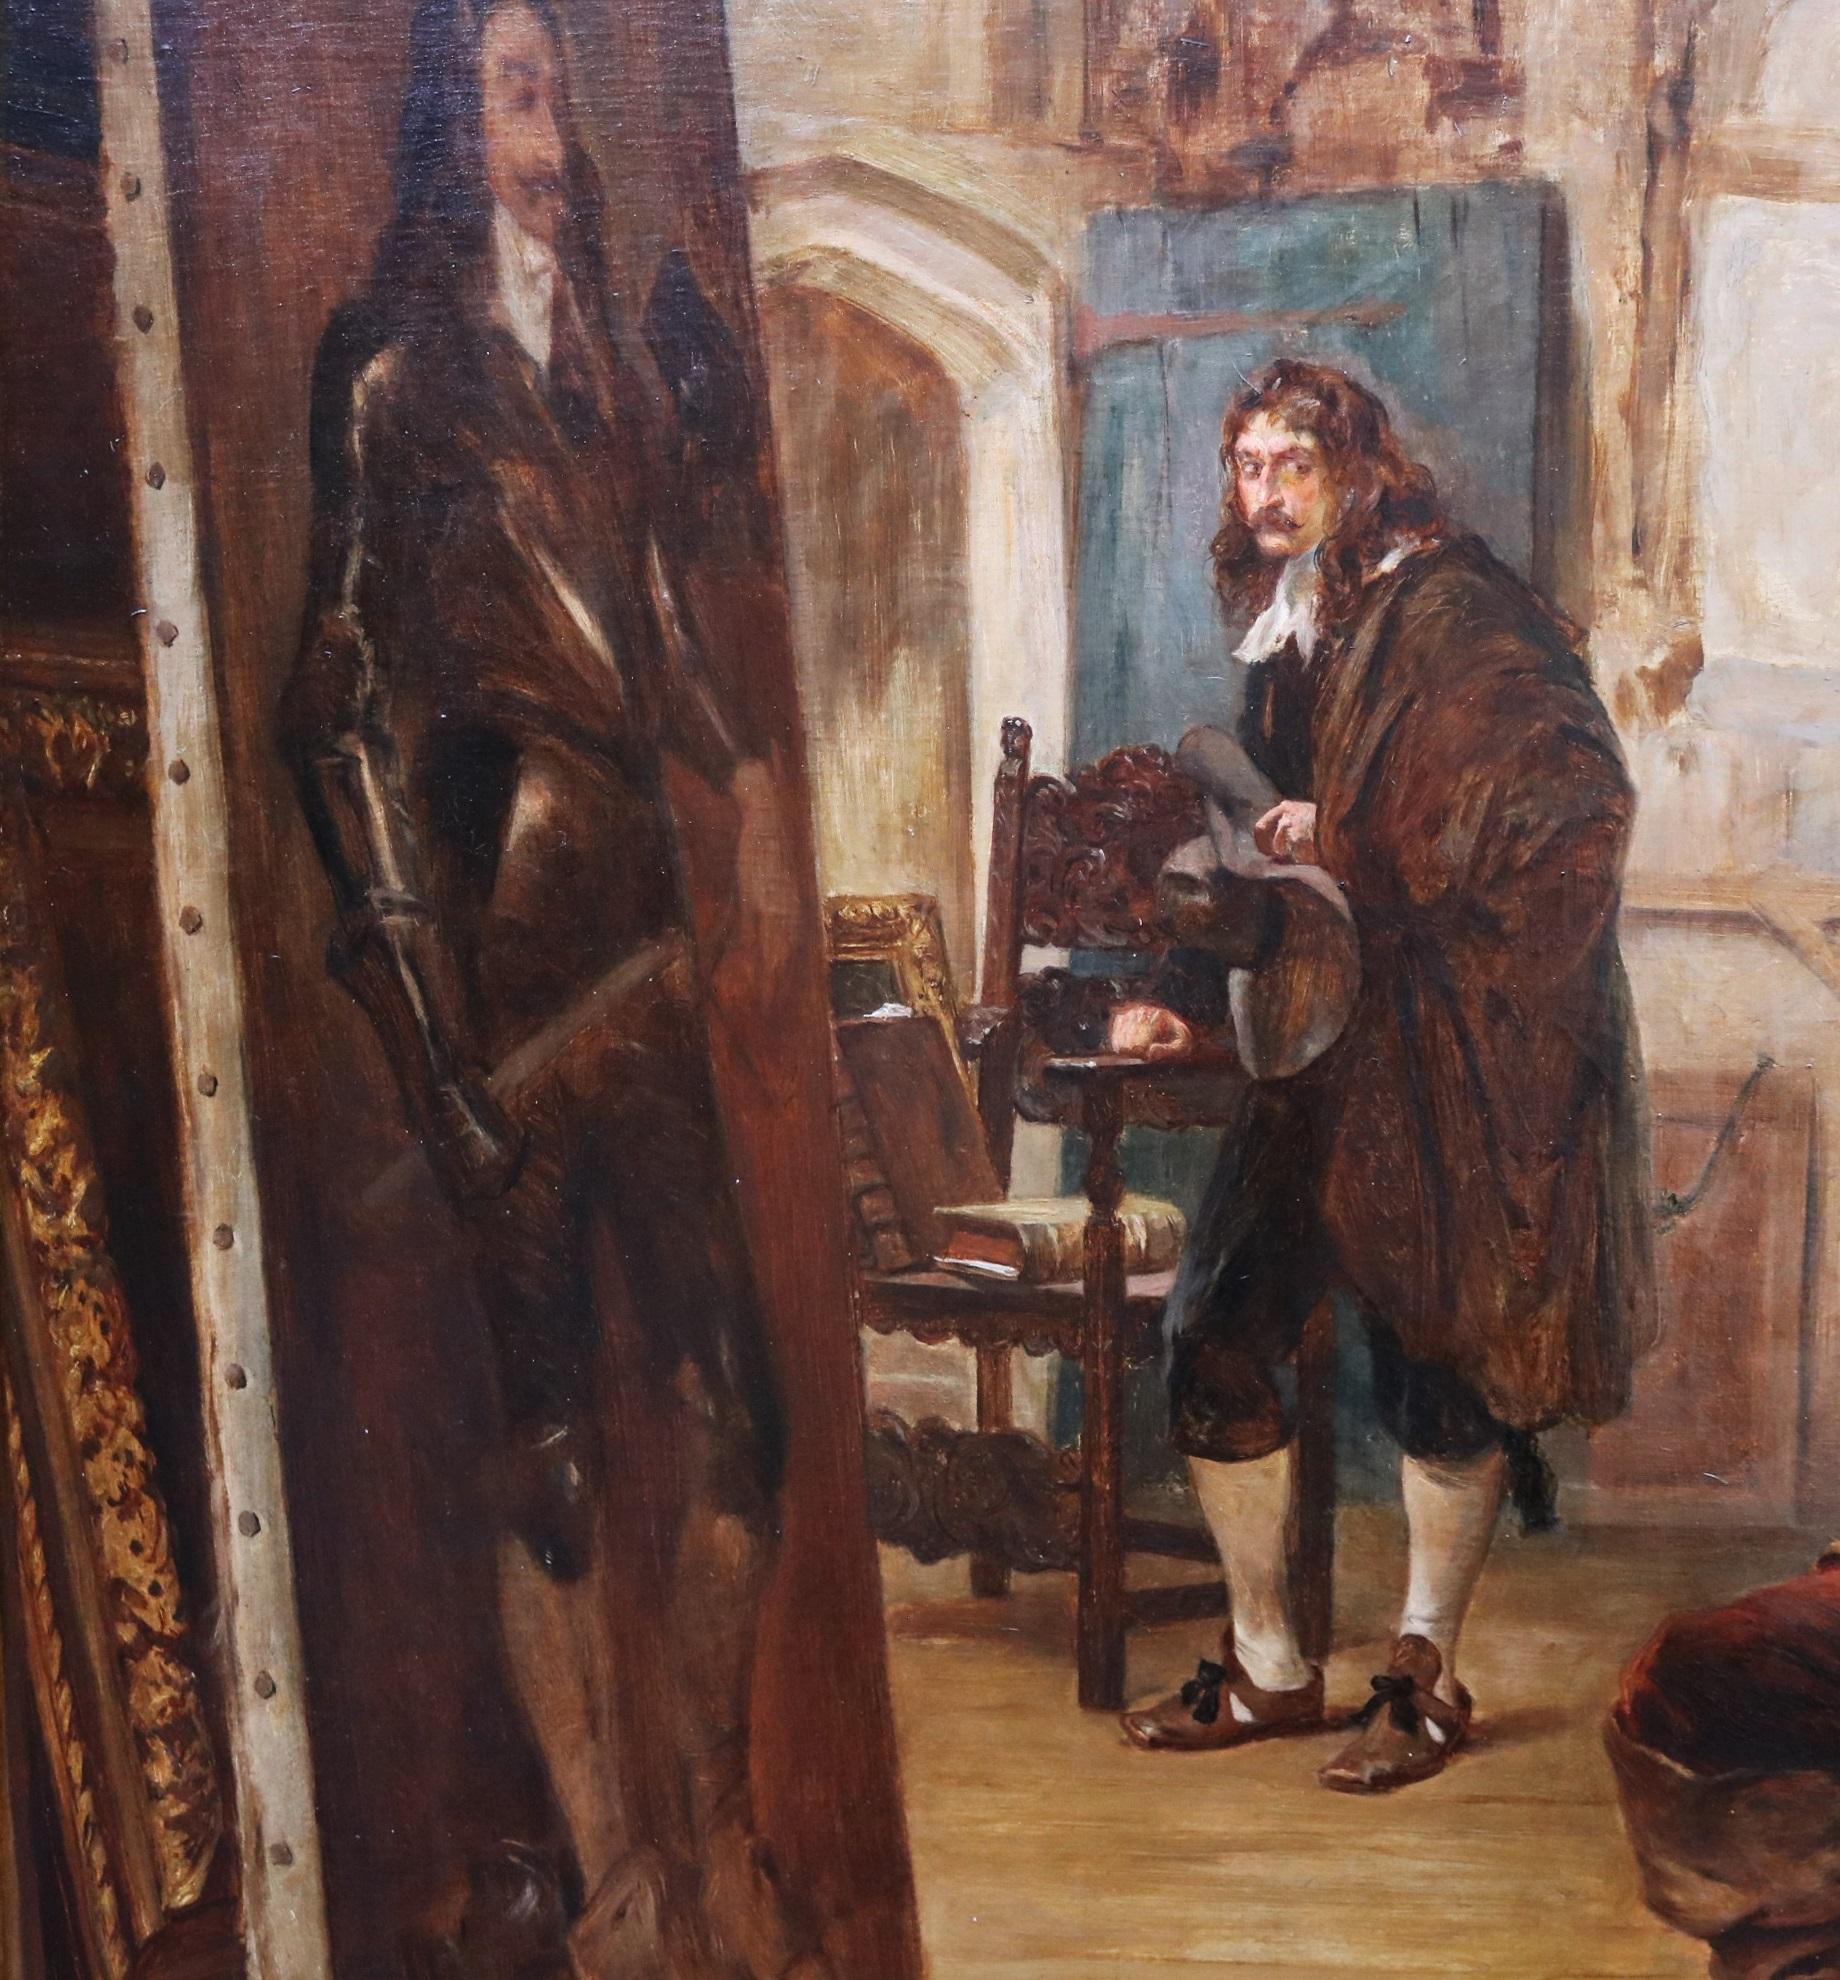 An Awful Deed - 19th Century Oil Painting of Oliver Cromwell & Van Dyke Portrait - Brown Interior Painting by Robert Alexander Hillingford